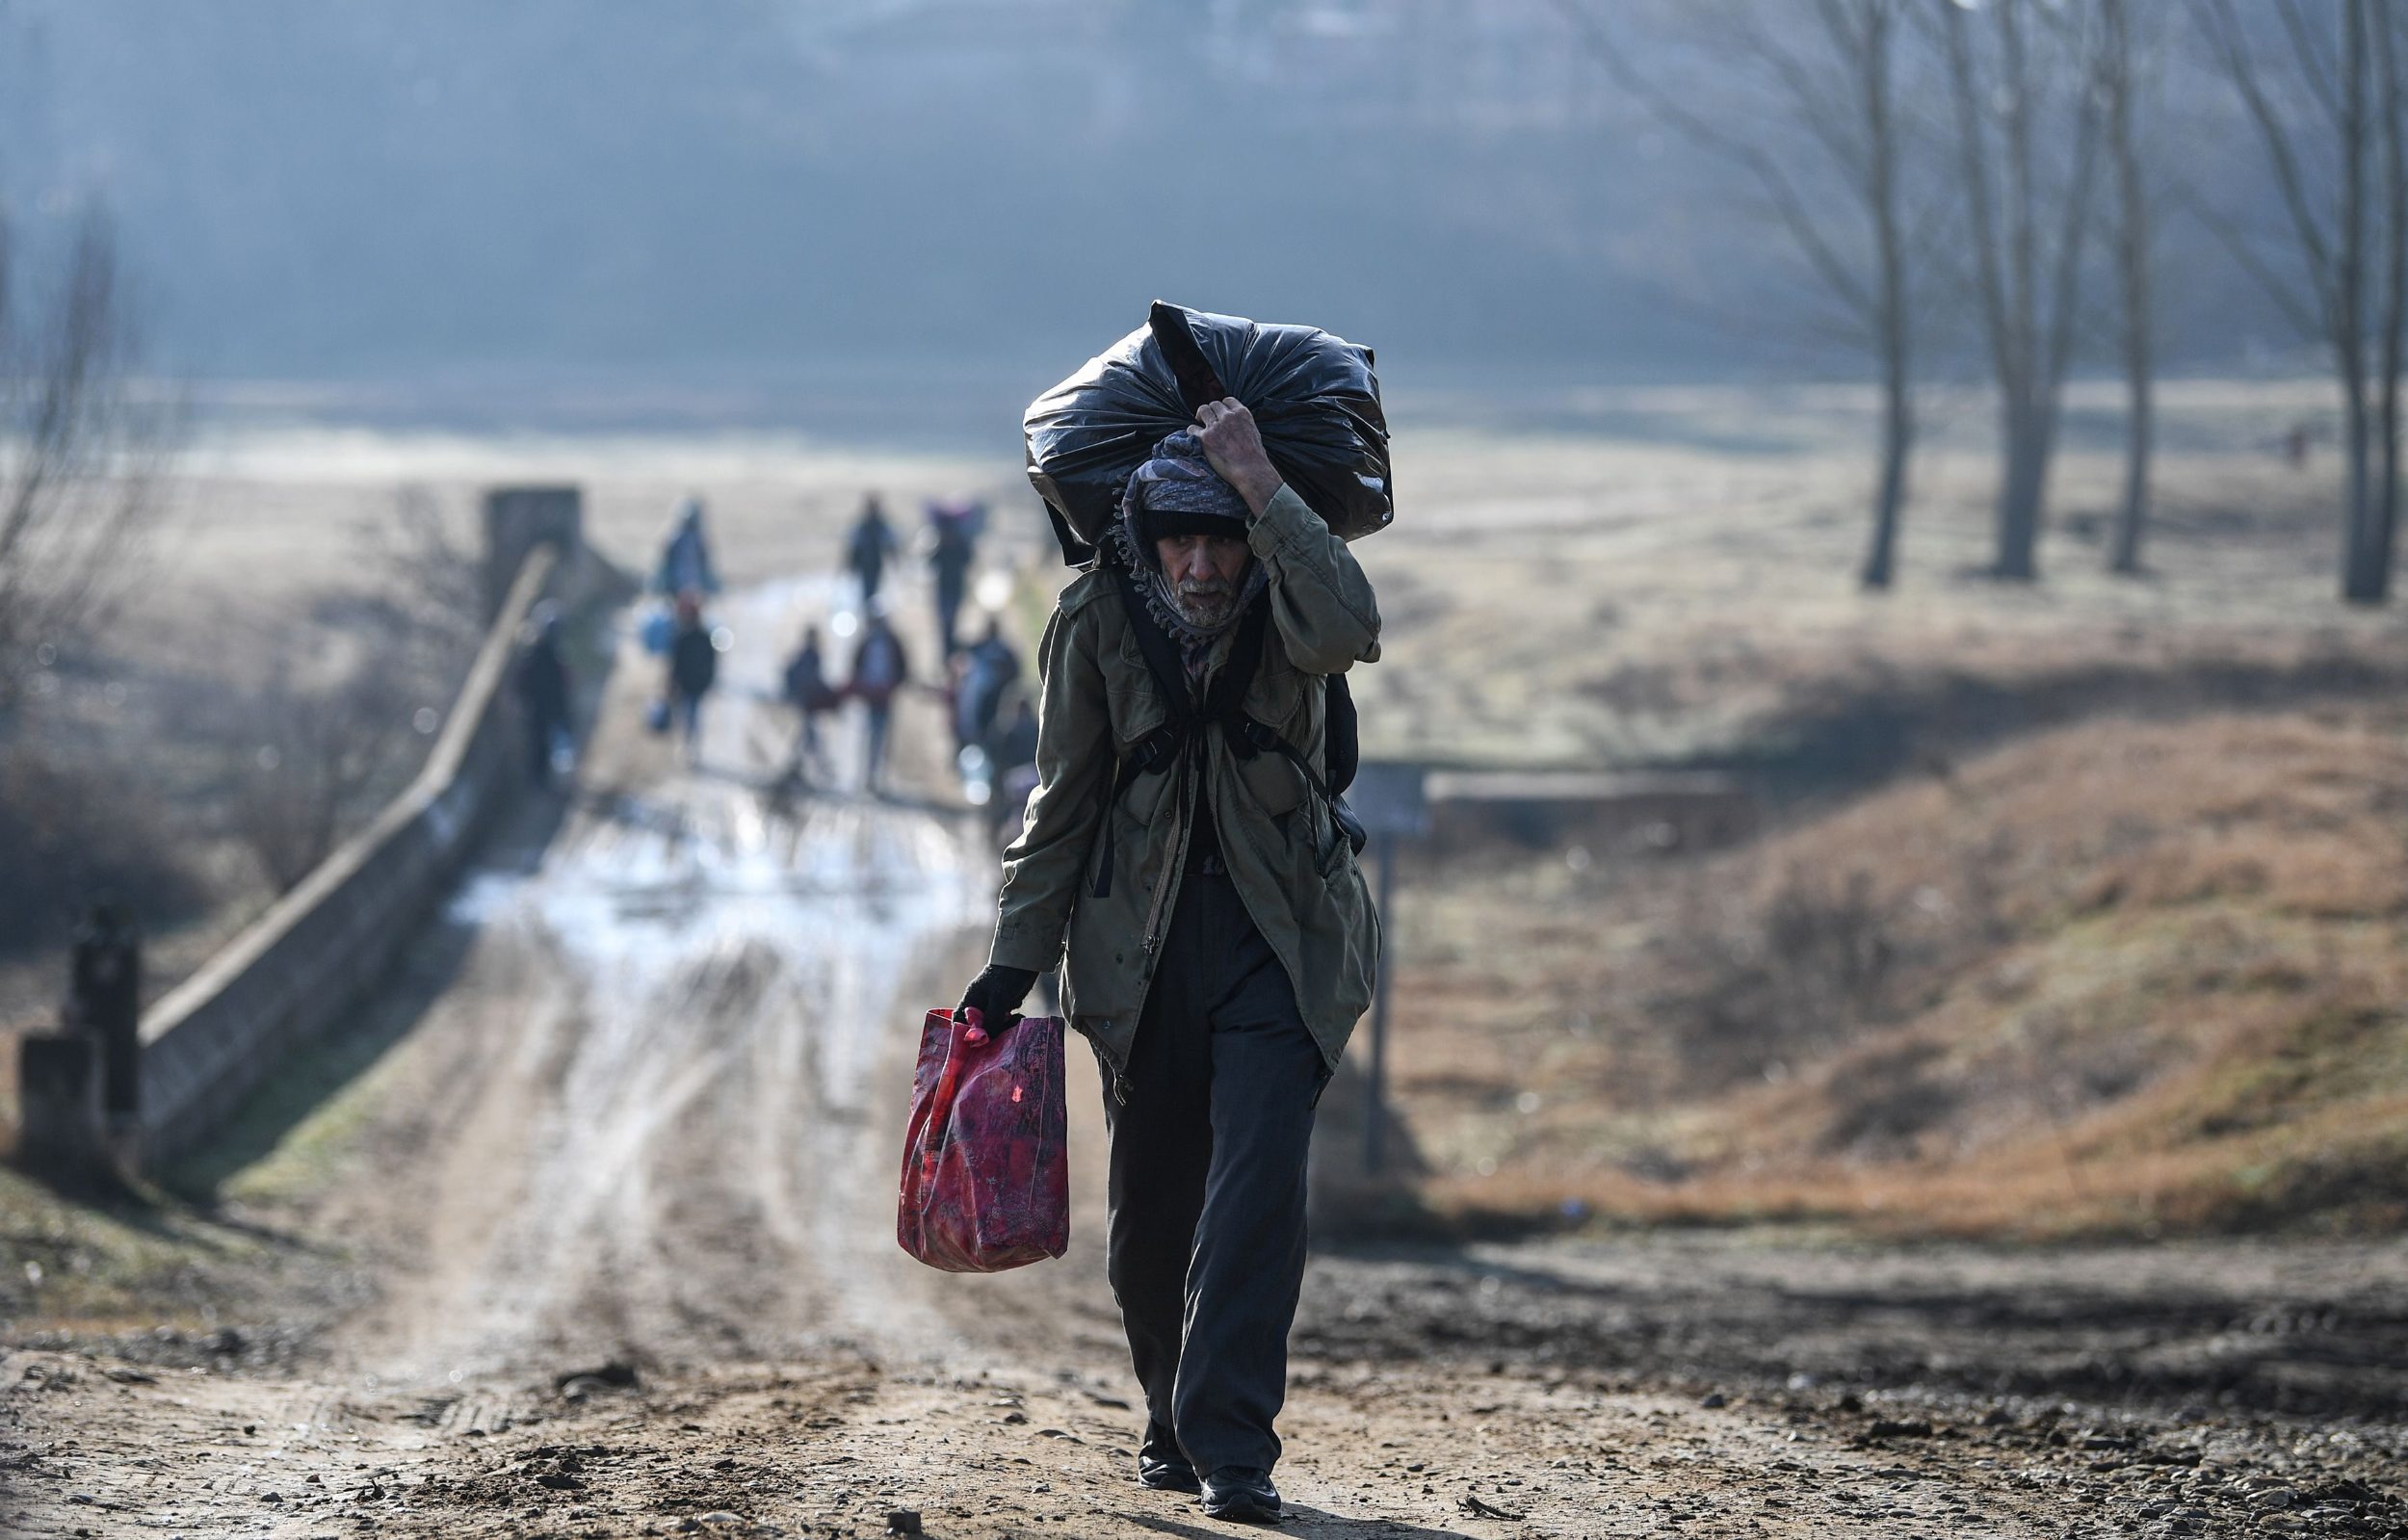 TOPSHOT - A migrant carries his belongings as he walks toward Meritsa river, near Edirne, to take a boat to attempt to enter Greece by crossing the river on March 1, 2020. - Thousands more migrants reached the Turkish border with Greece on March 1, 2020, AFP journalists said, after President threatened to let them cross into Europe. At least 2,000 people including women and children arrived on the morning from Istanbul and walked through a field towards the Pazarkule border gate, a correspondent said. The group included Afghans, Syrians and Iraqis. (Photo by Ozan KOSE / AFP)